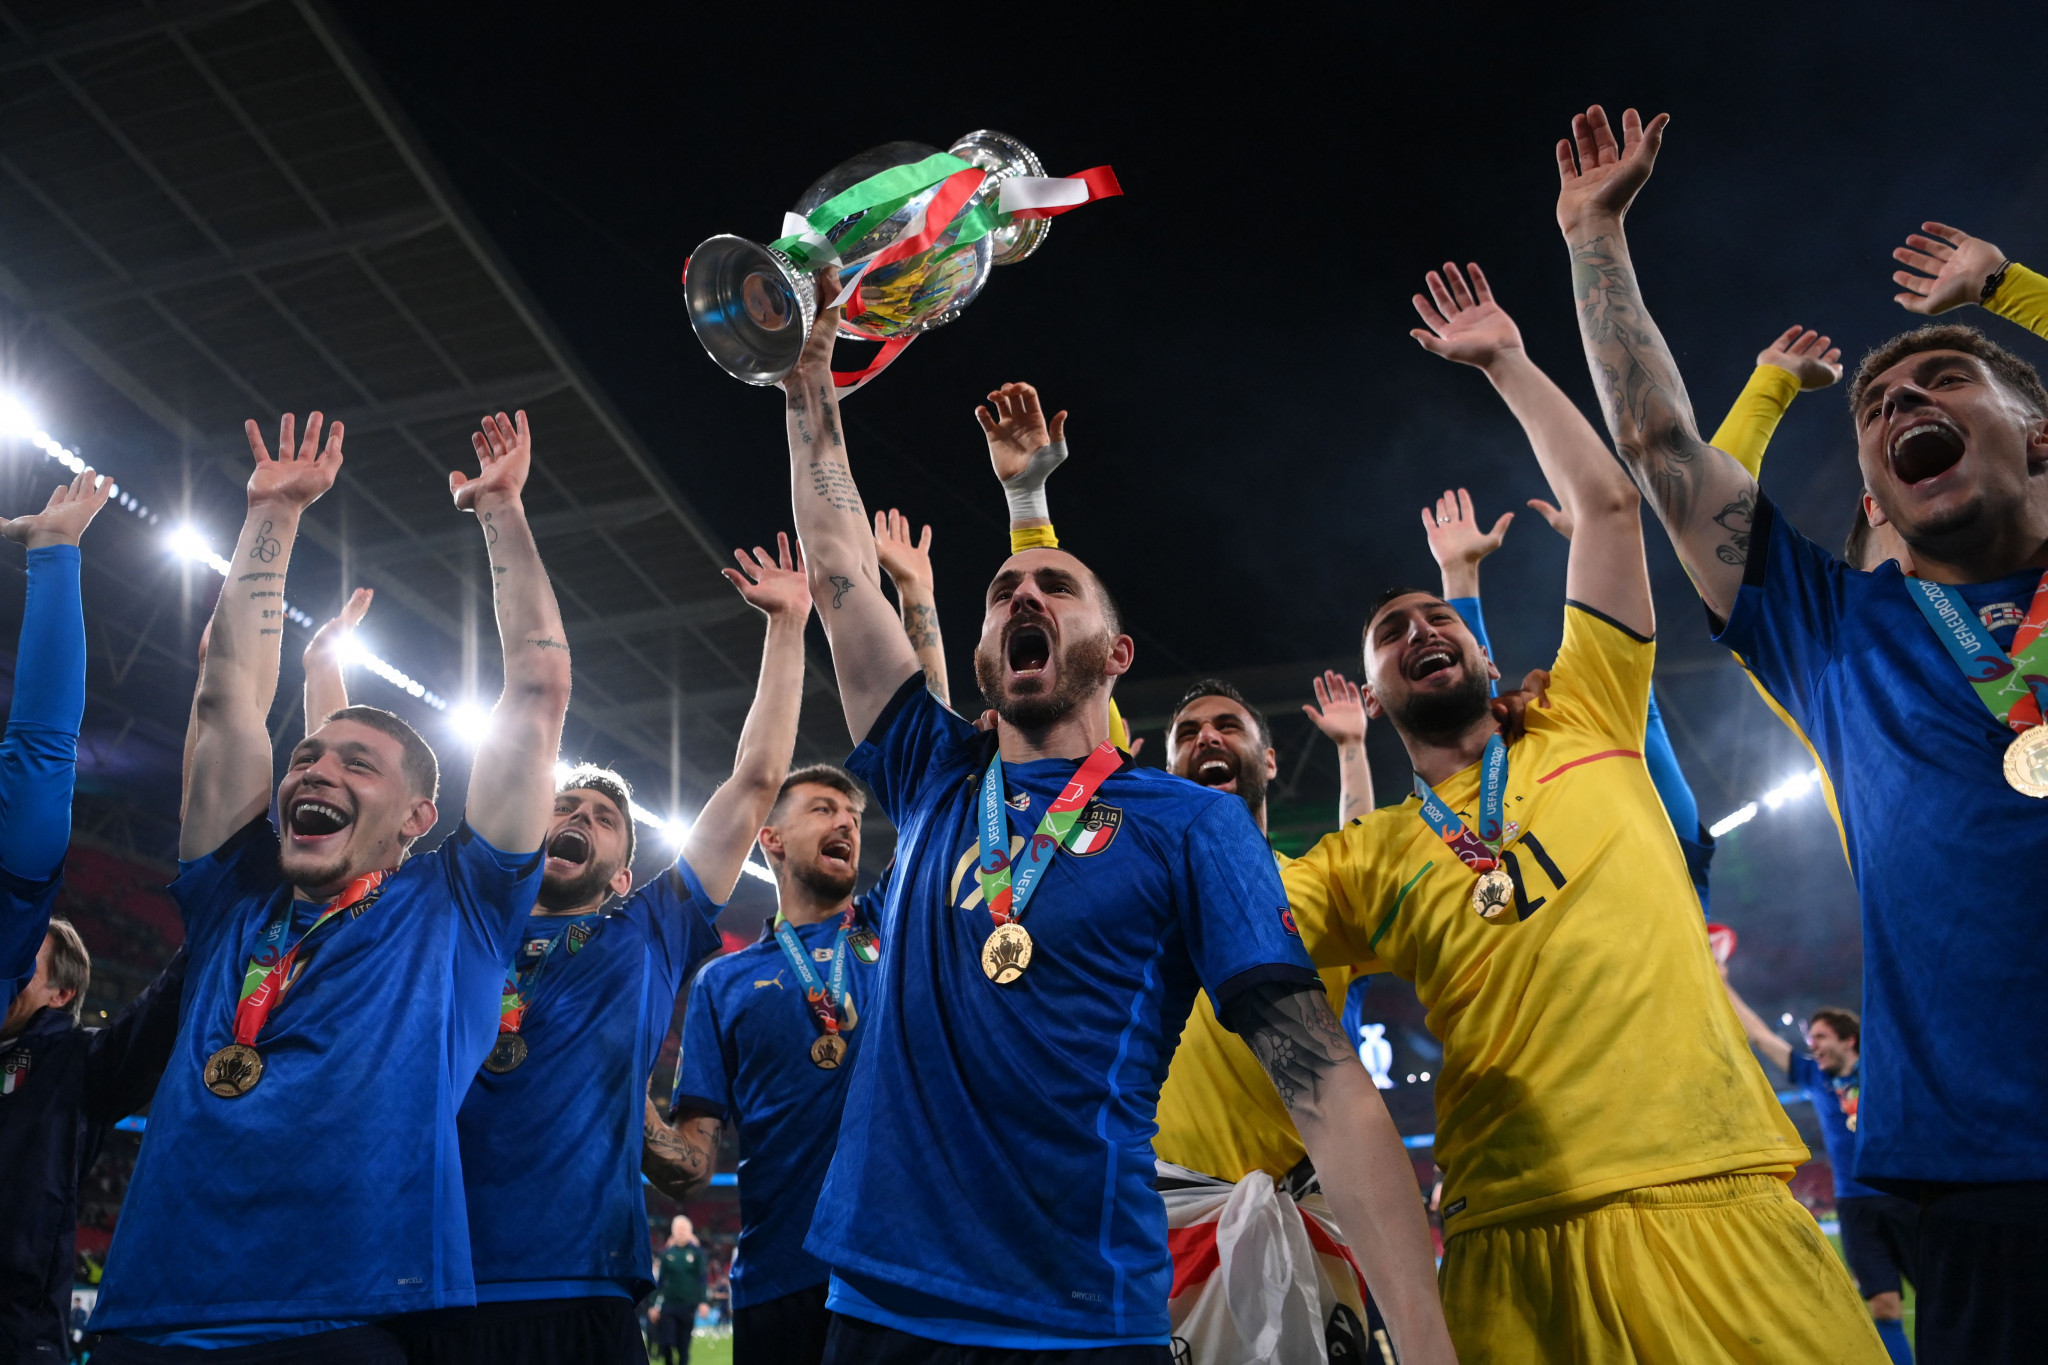 Following the country's Euro 2020 win, the Italian Football Federation said it was considering a bid for the 2028 edition ©Getty Images